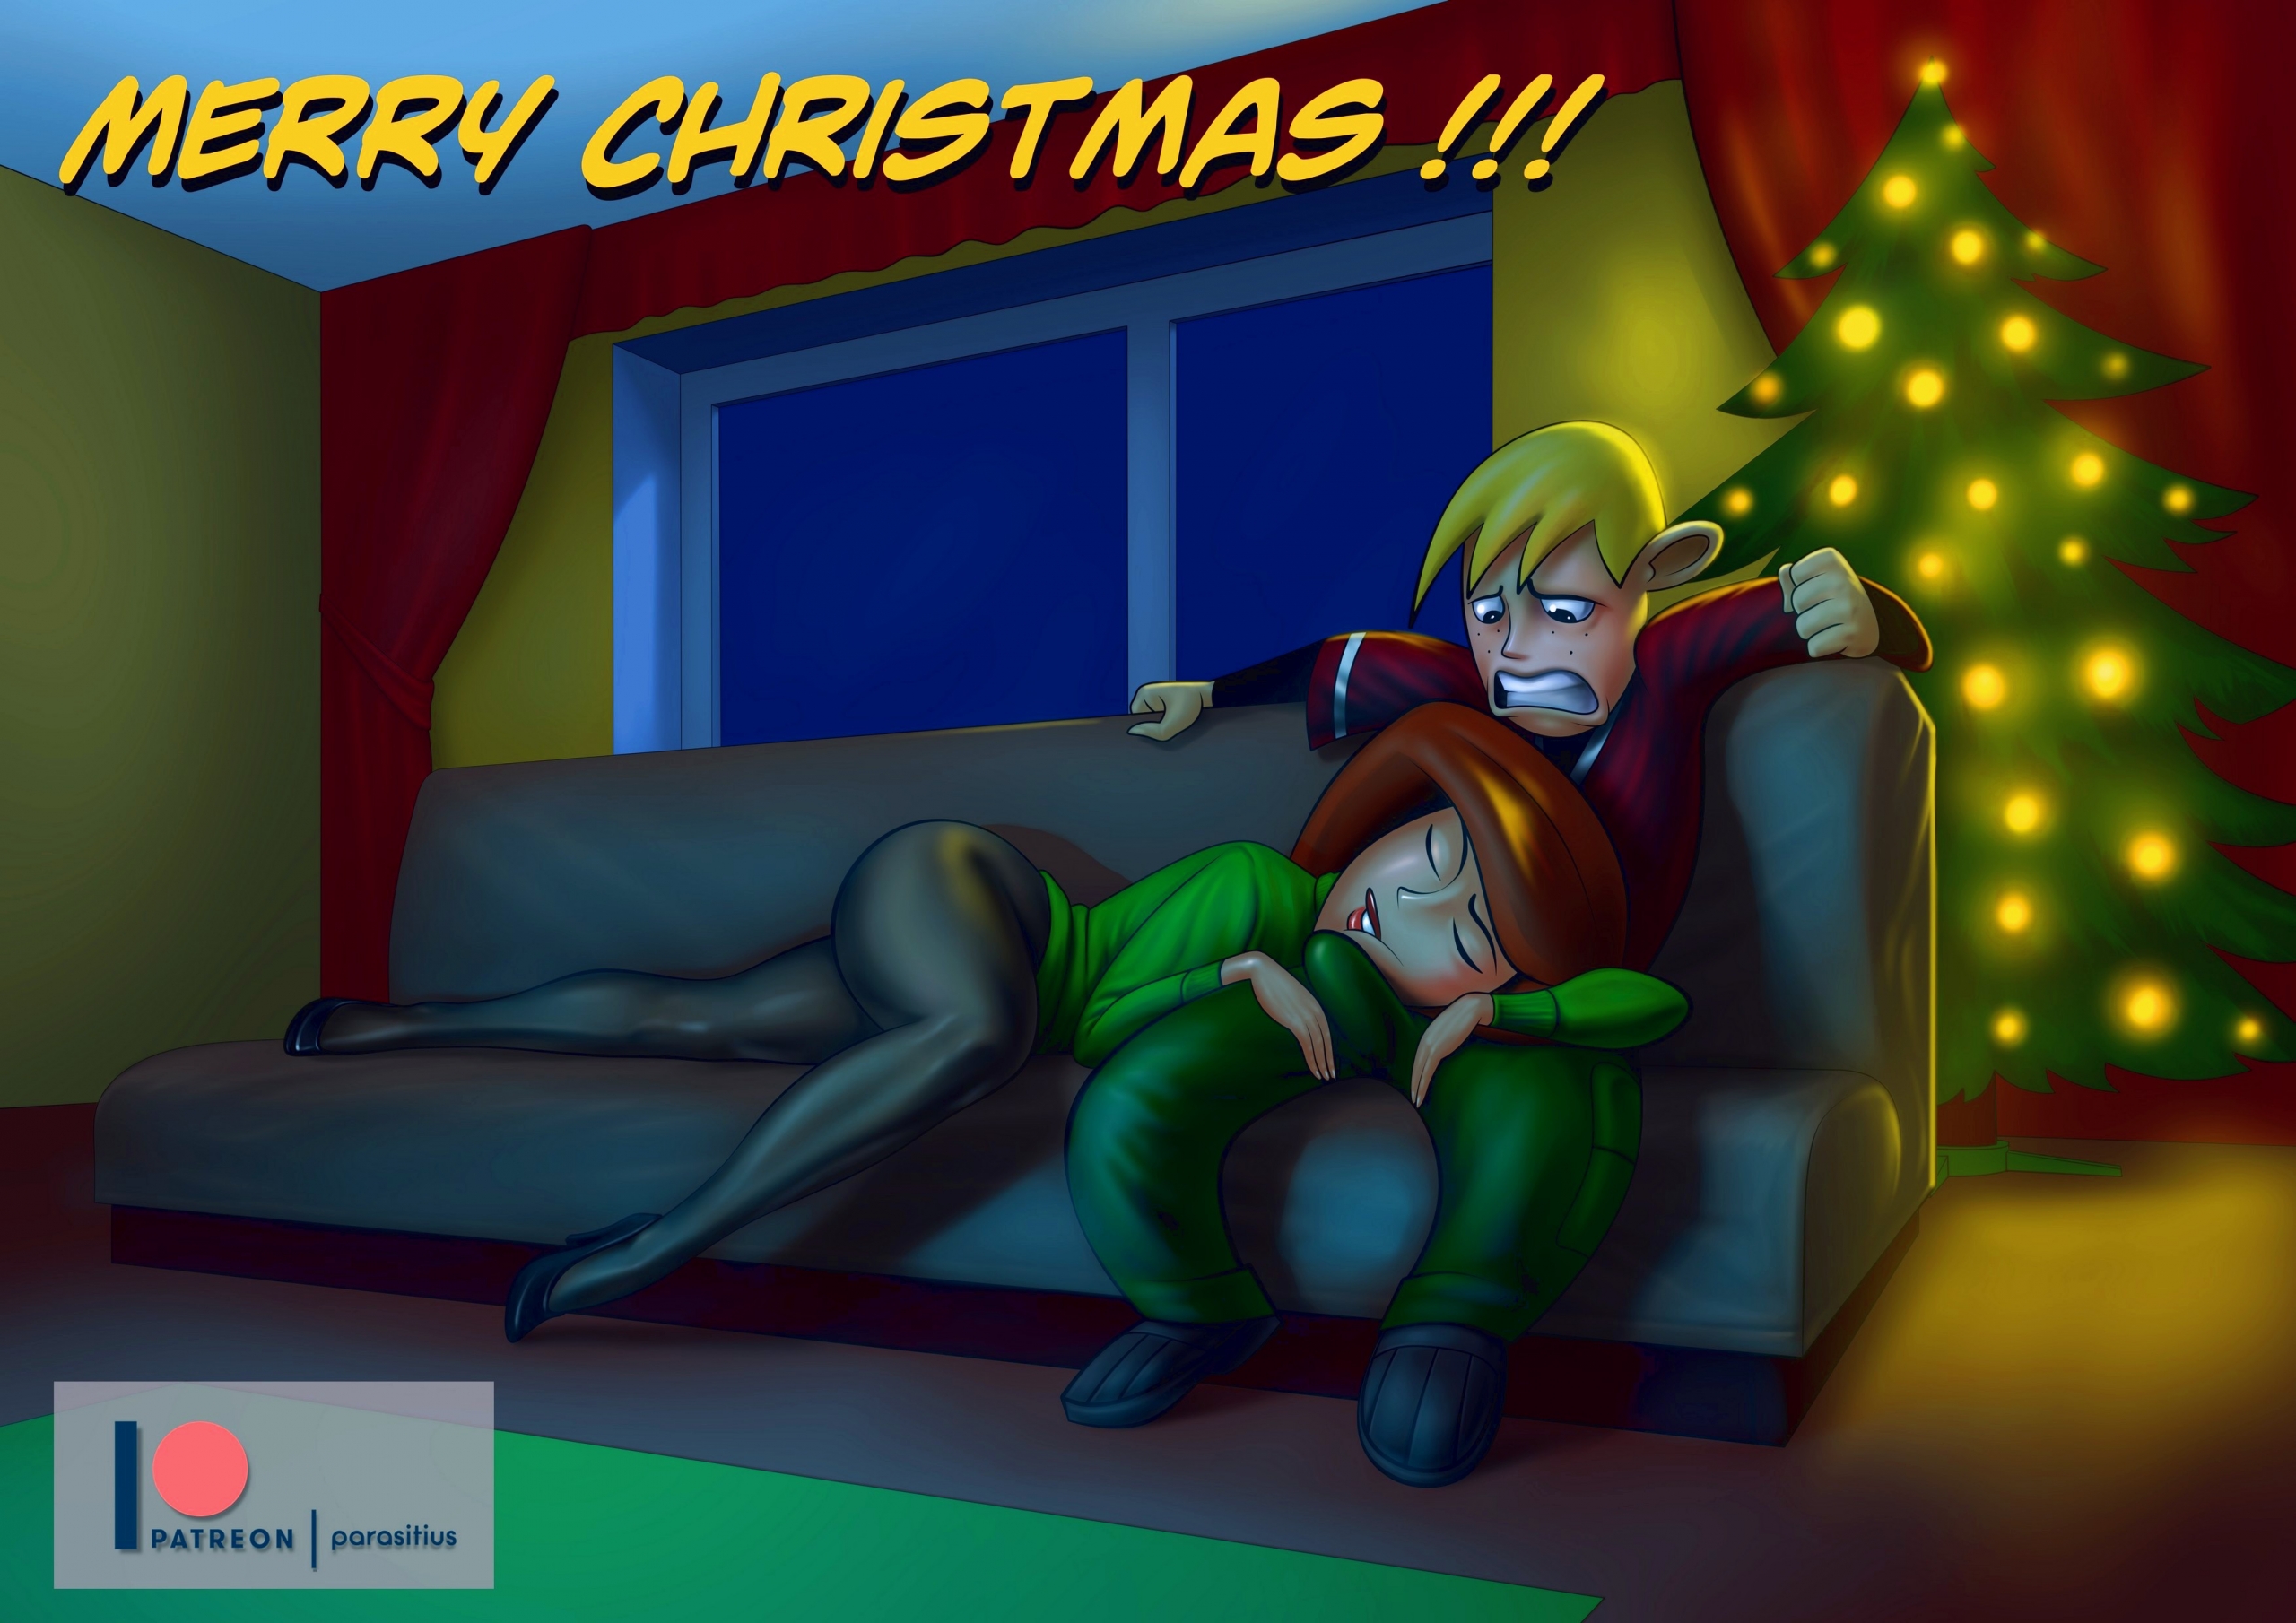 Merry Christmas to Ron porn comic page 001 on category Kim Possible